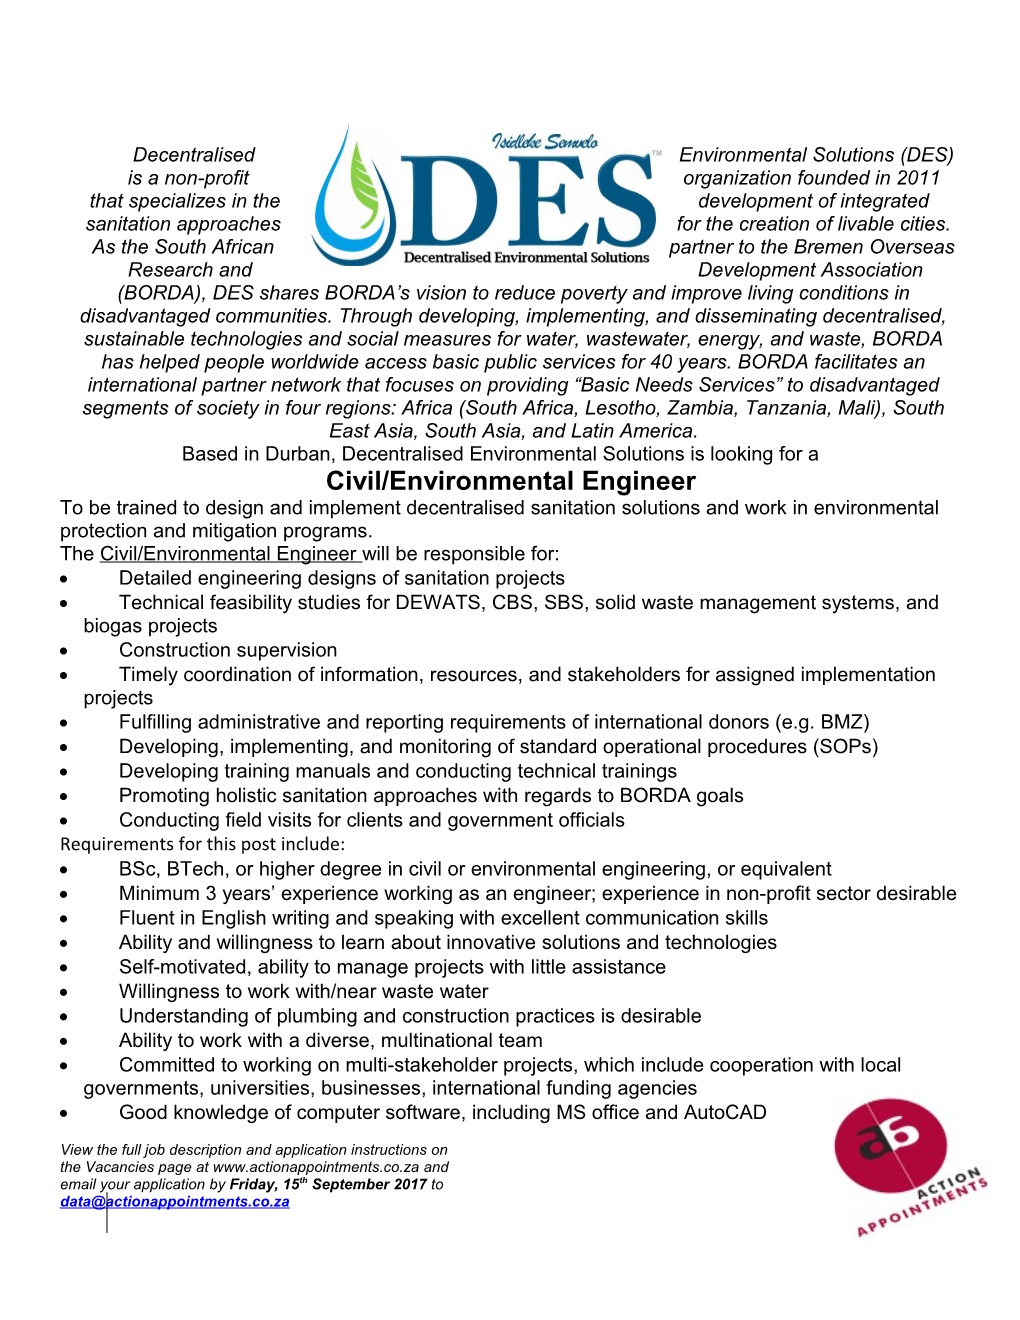 Based in Durban, Decentralised Environmental Solutions Is Looking for A